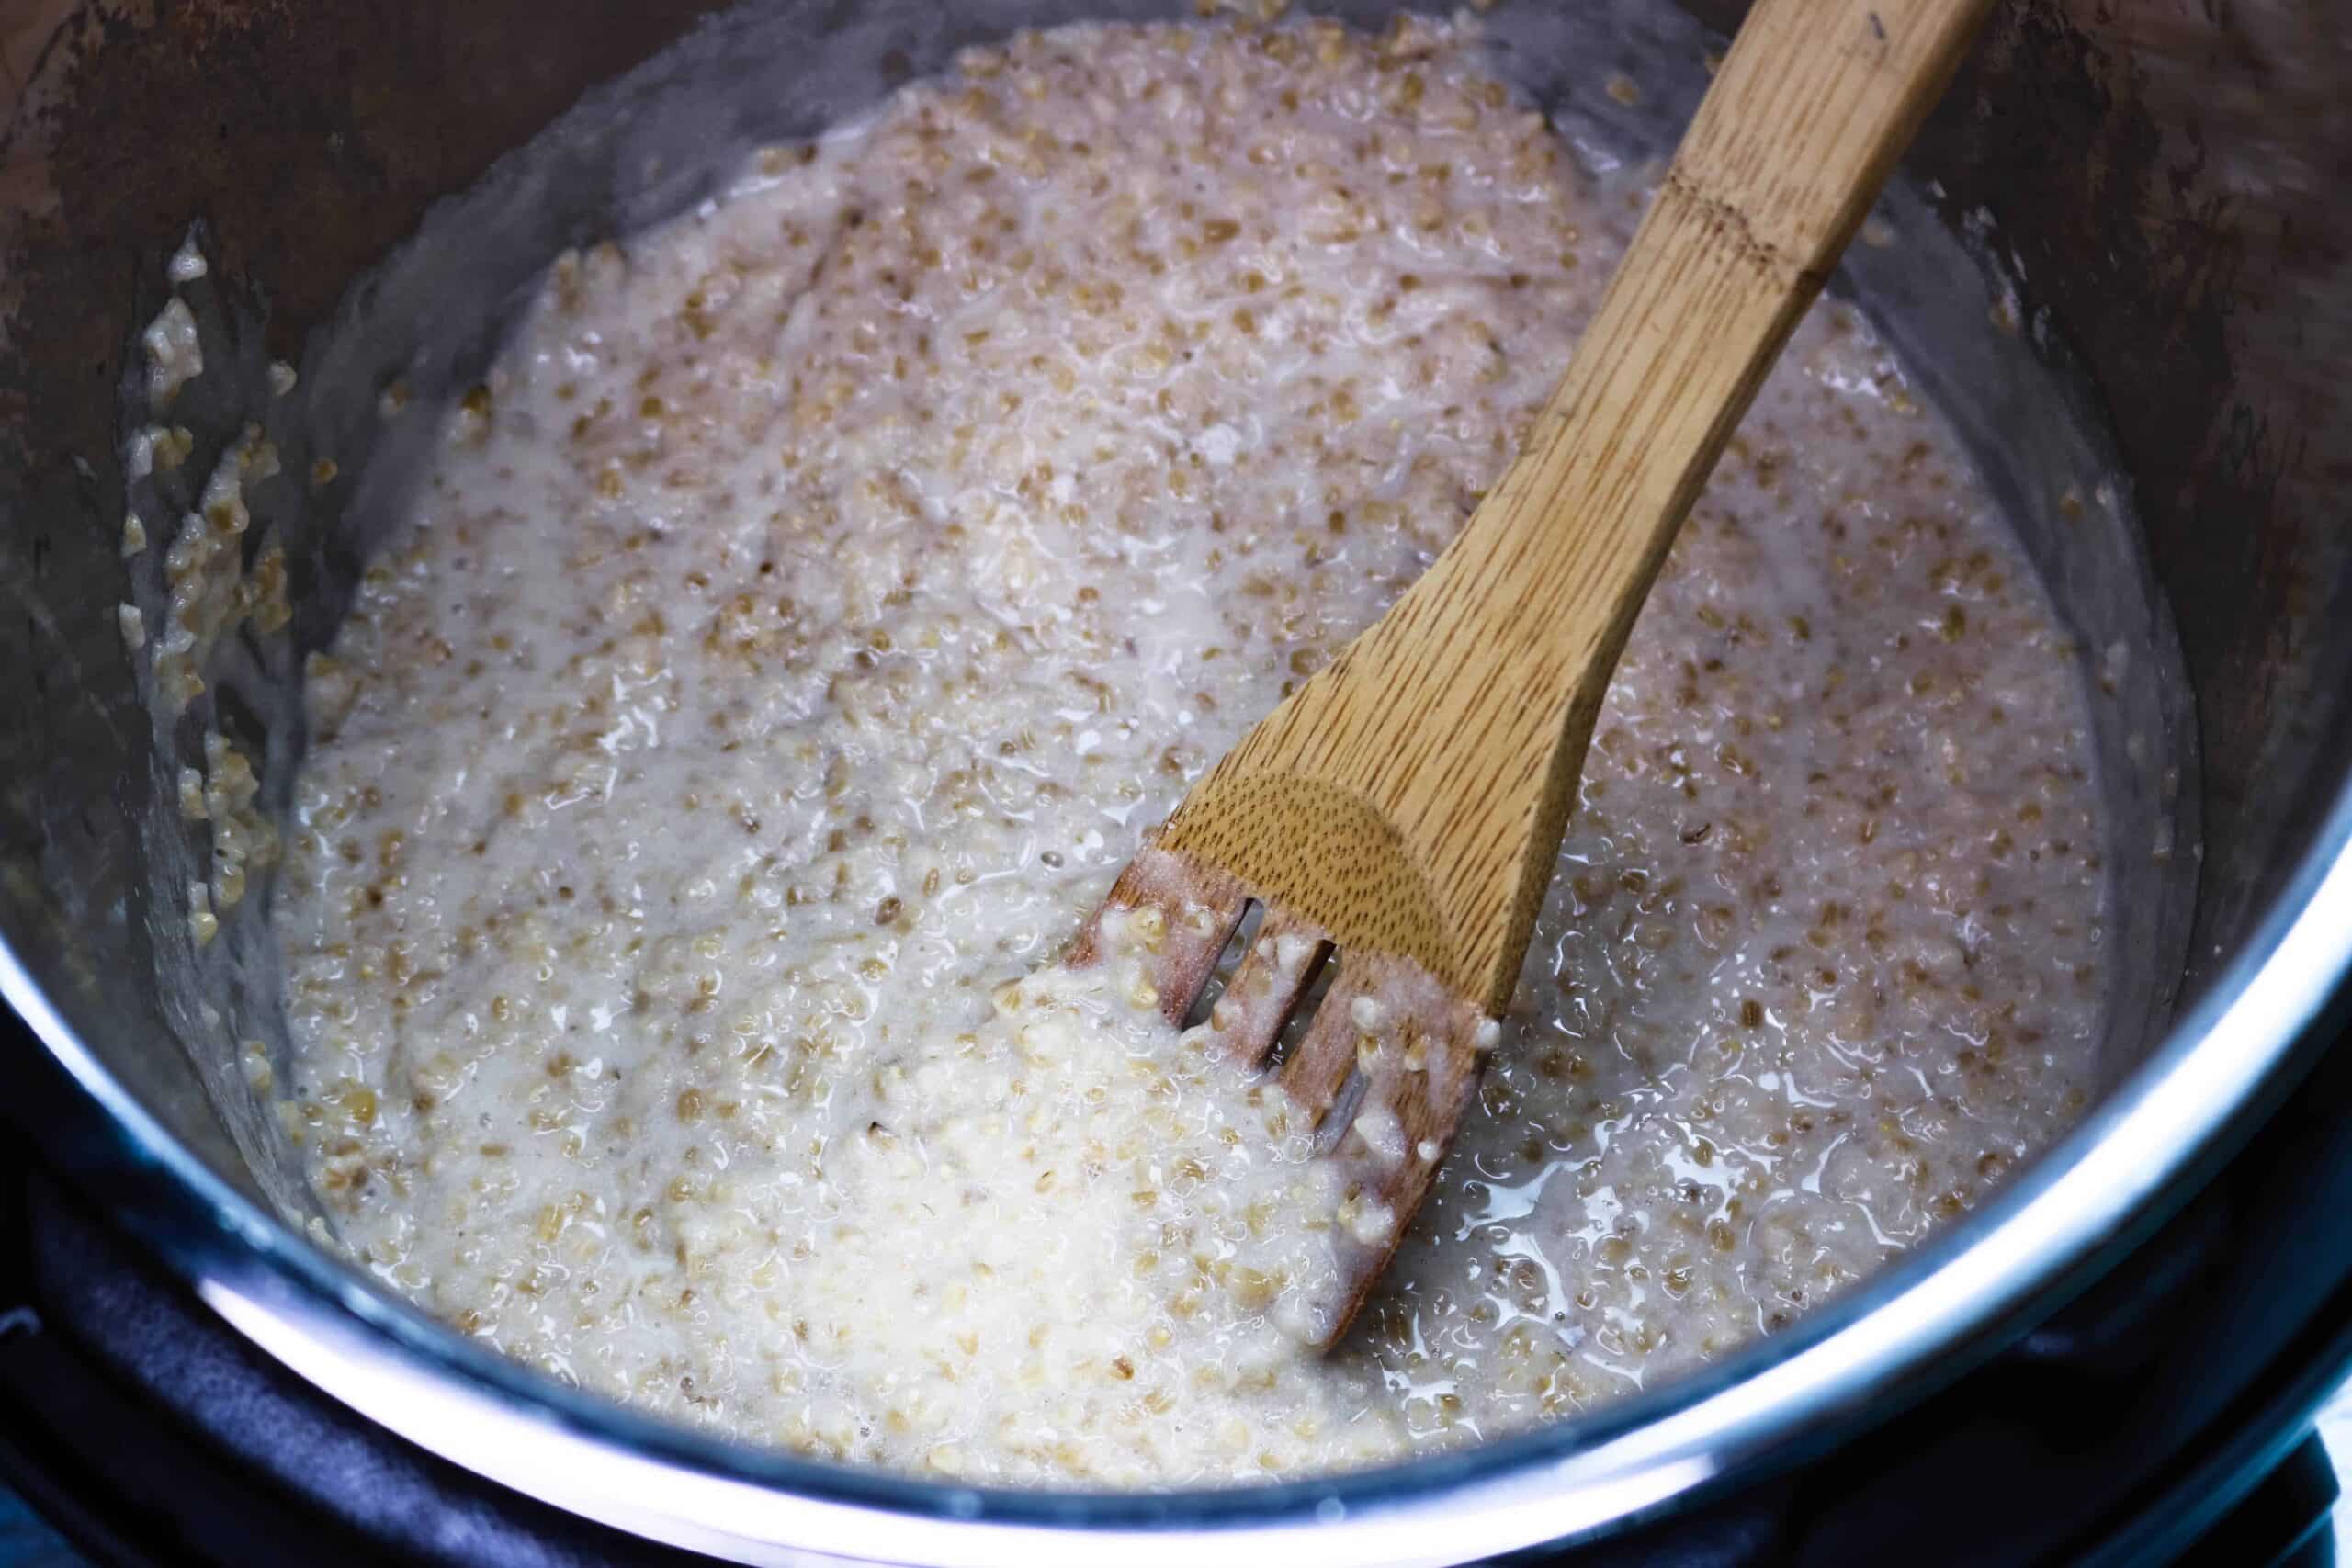 cooked steel cut oats inside the Instant Pot being stirred with a wooden spoon